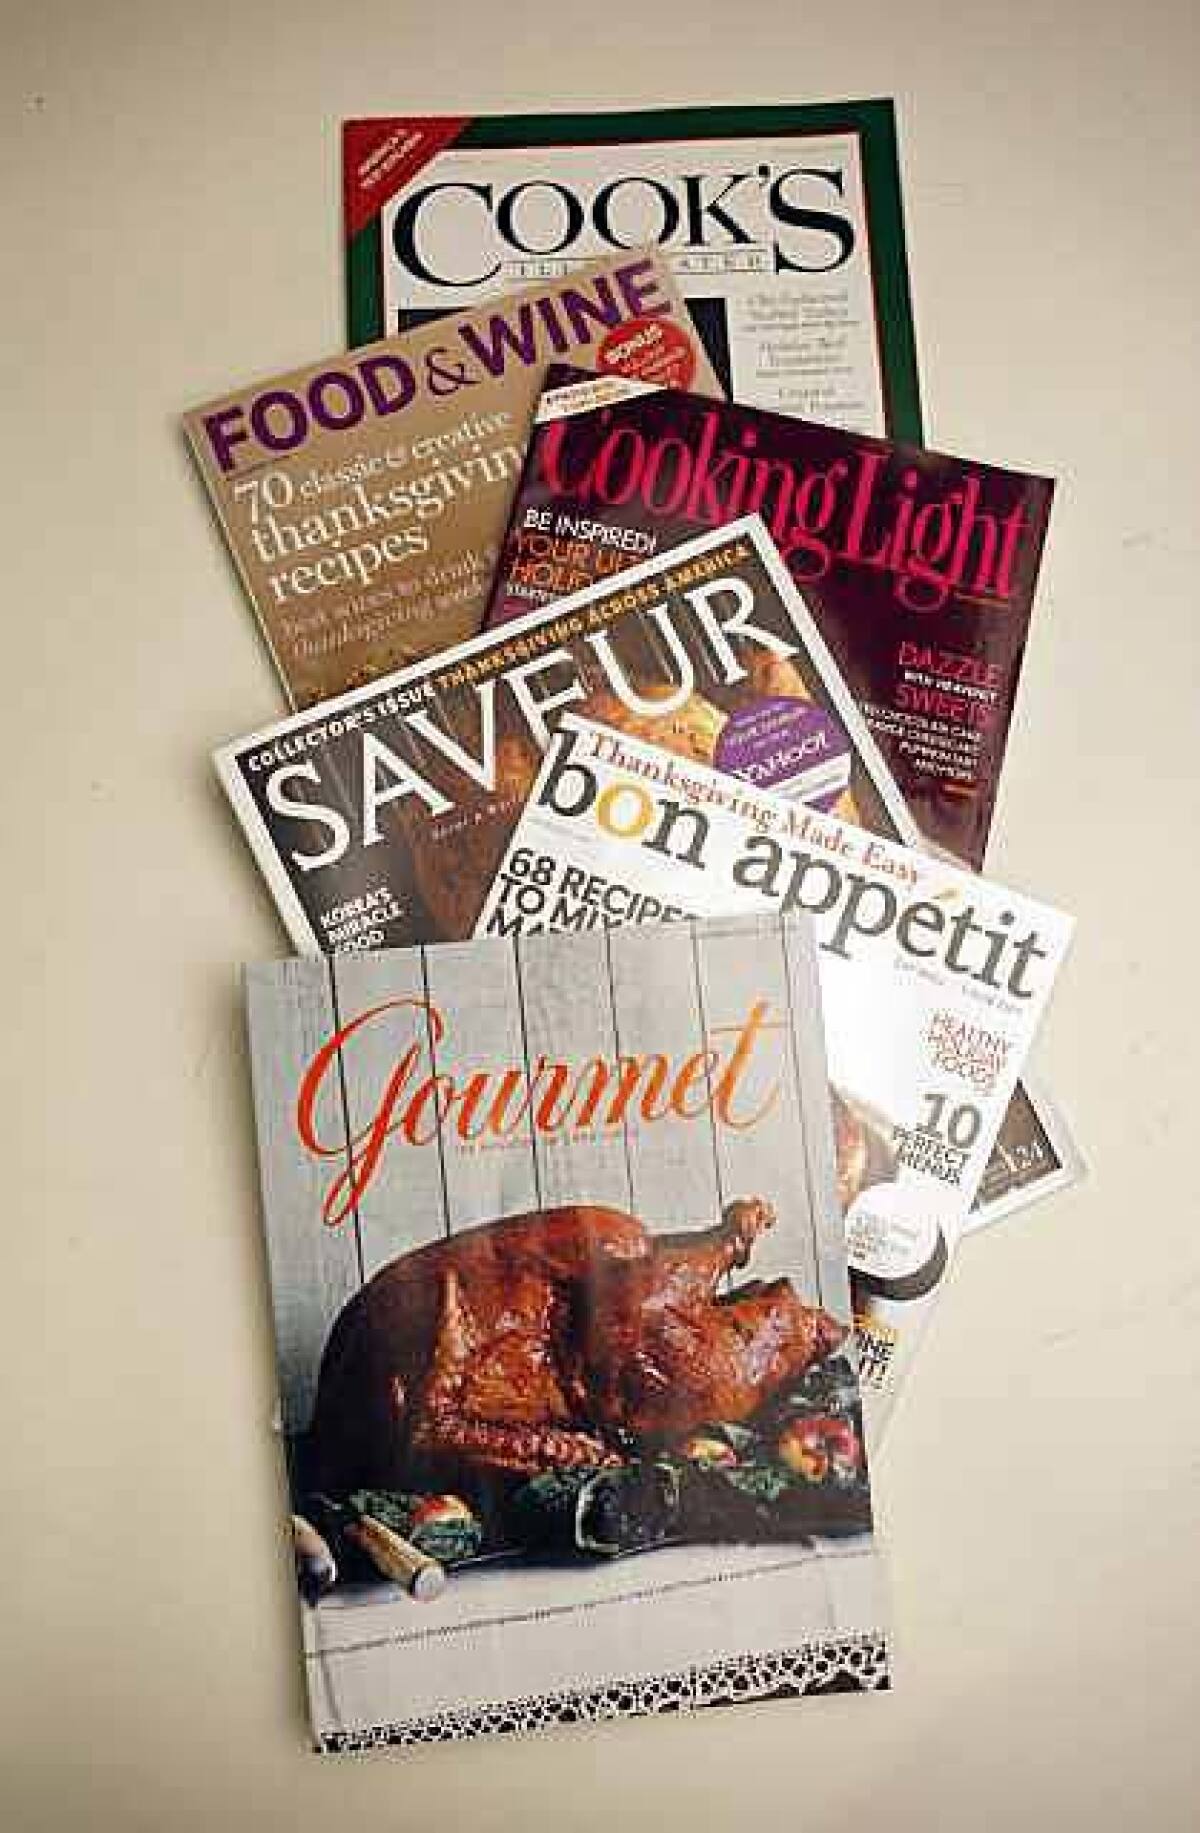 Gourmet, Bon Appetit, Saveur, Cooking Light, Food & Wine and Cook's Illustrated magazines